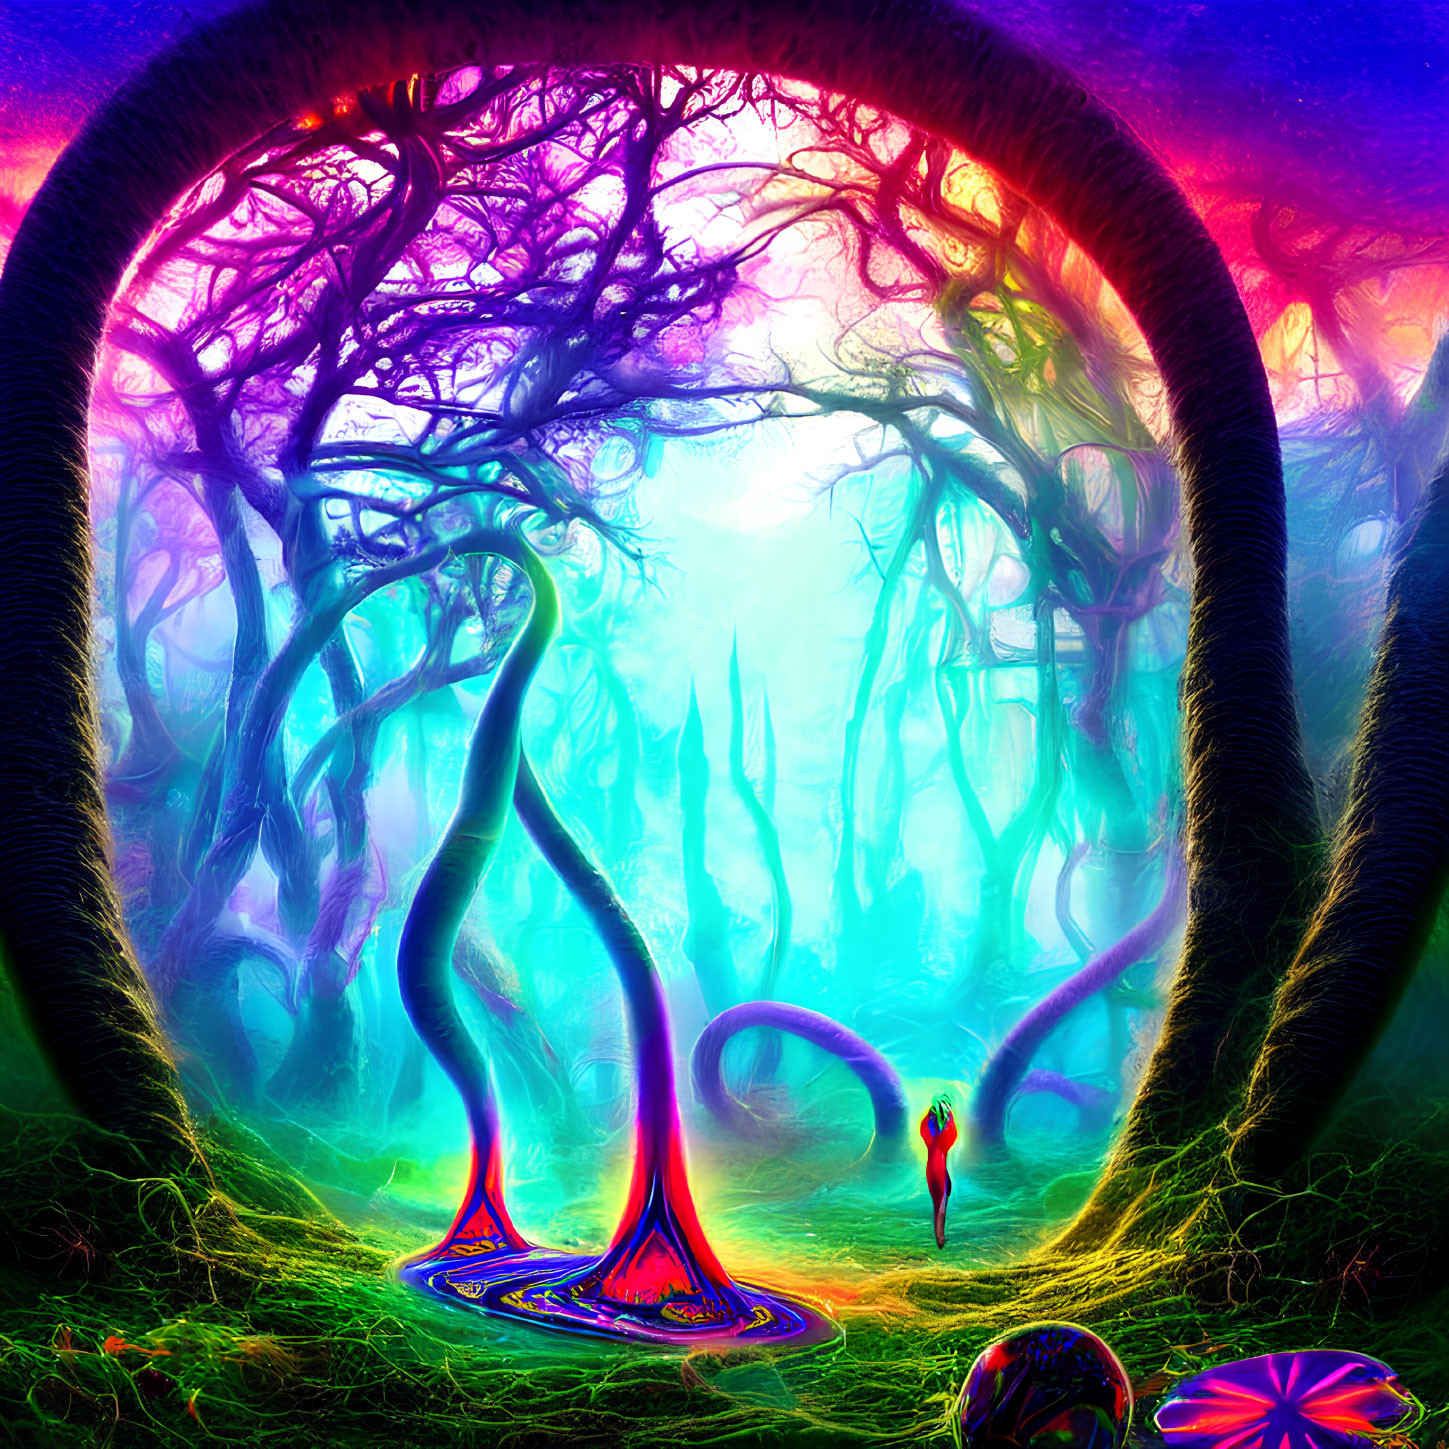 Colorful surreal forest with twisted trees and neon hues